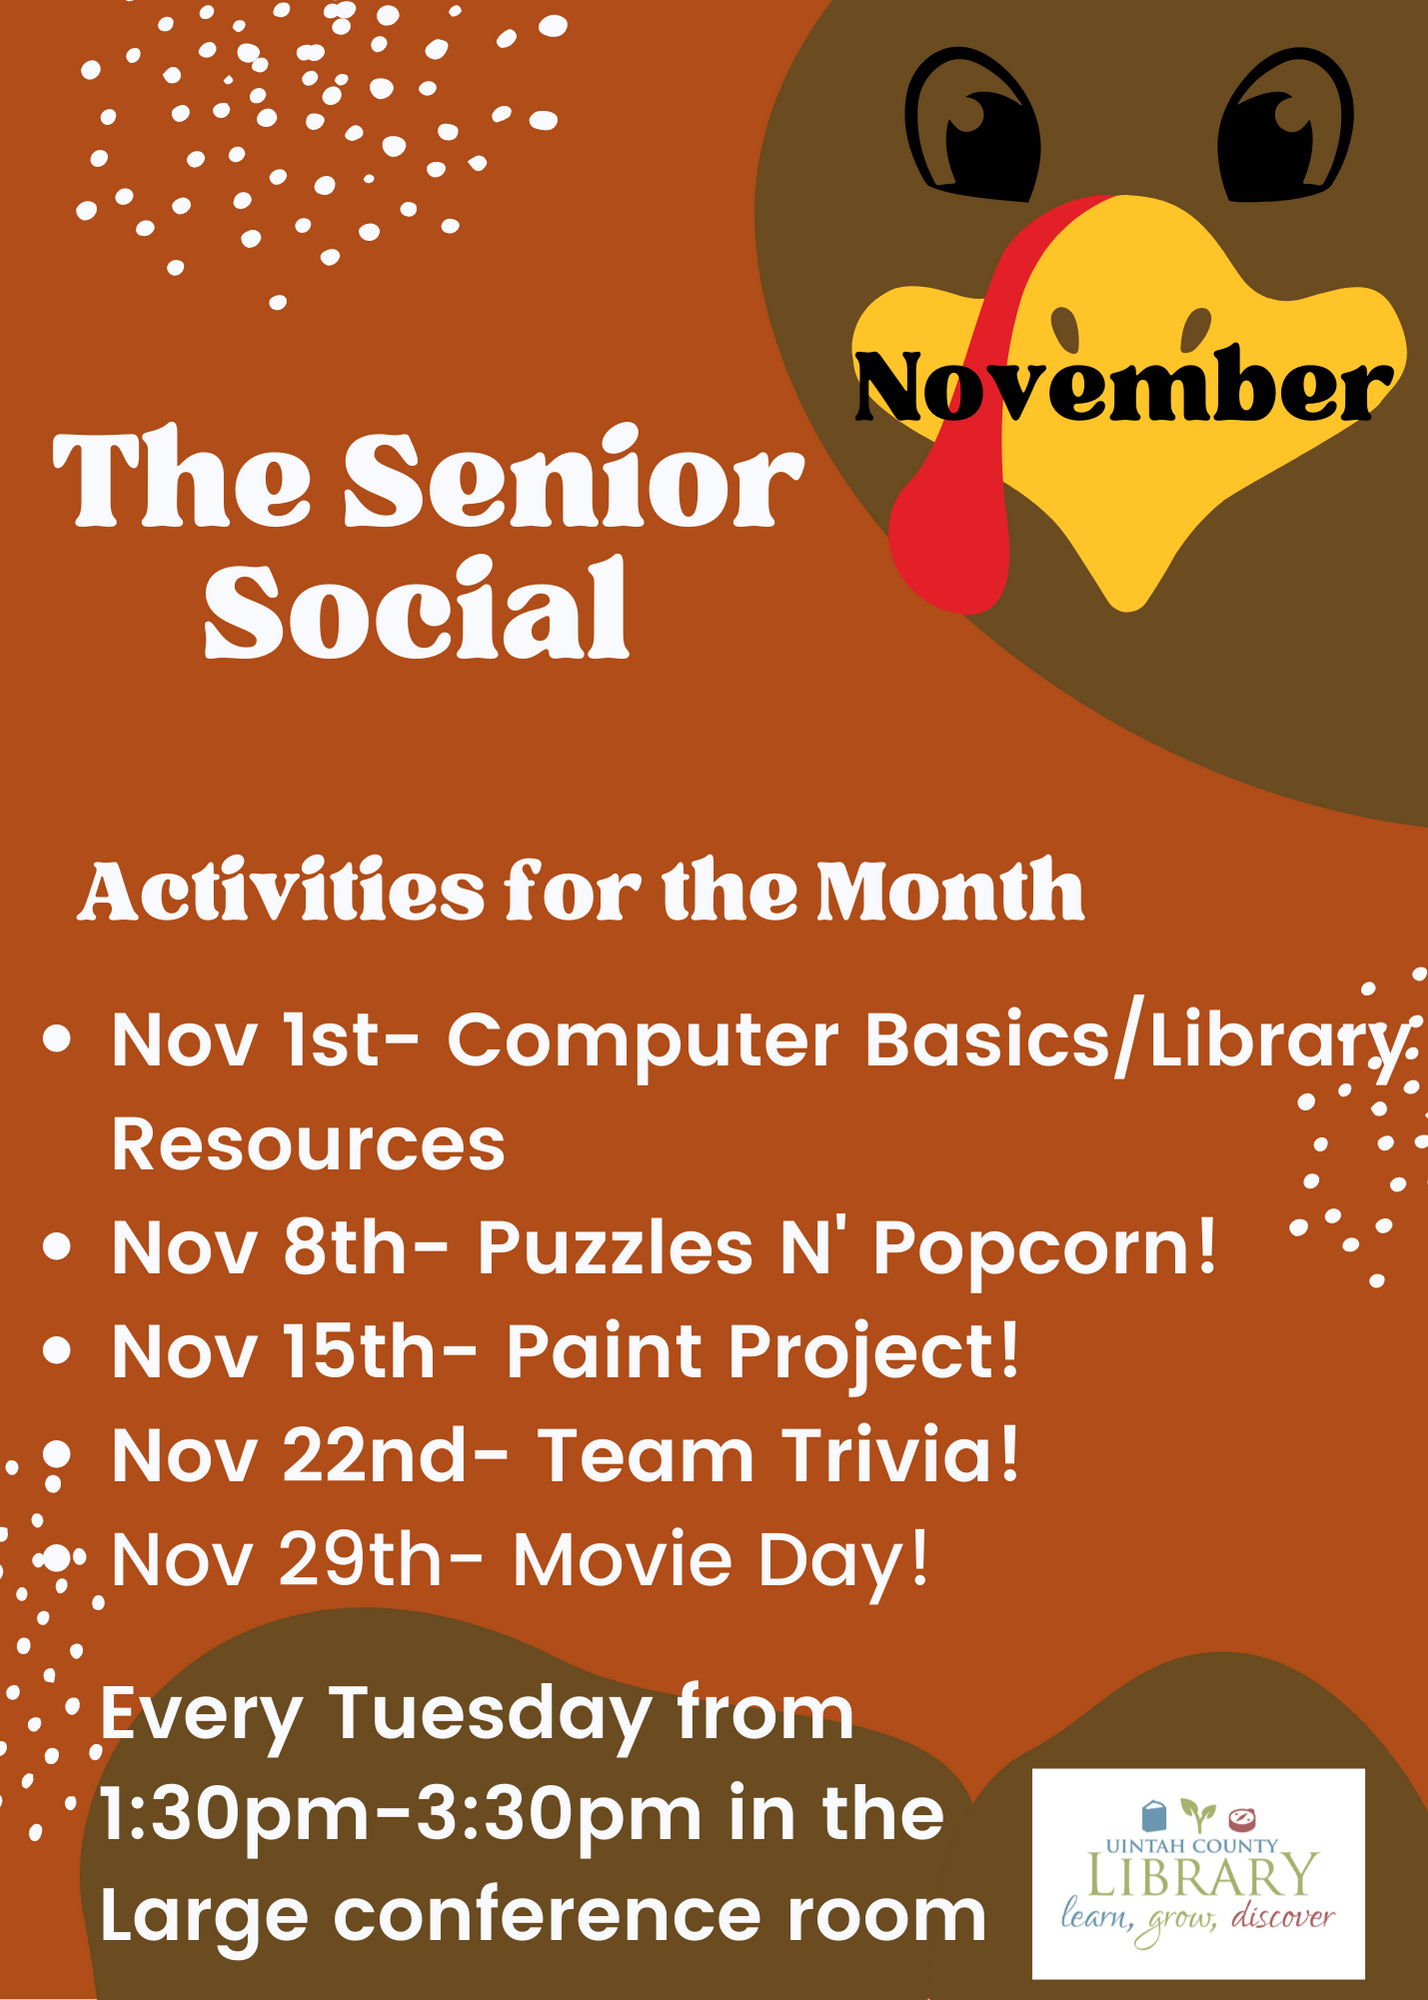 The Senior Social, November, Activities for the month: Nov 1st- Computer Basics/Library Resources, Nov 8th-Puzzles N' Popcorn, Nov 15th- Paint Project!, Nov 22nd- Team Trivia!, Nov 29th- Movie Day!